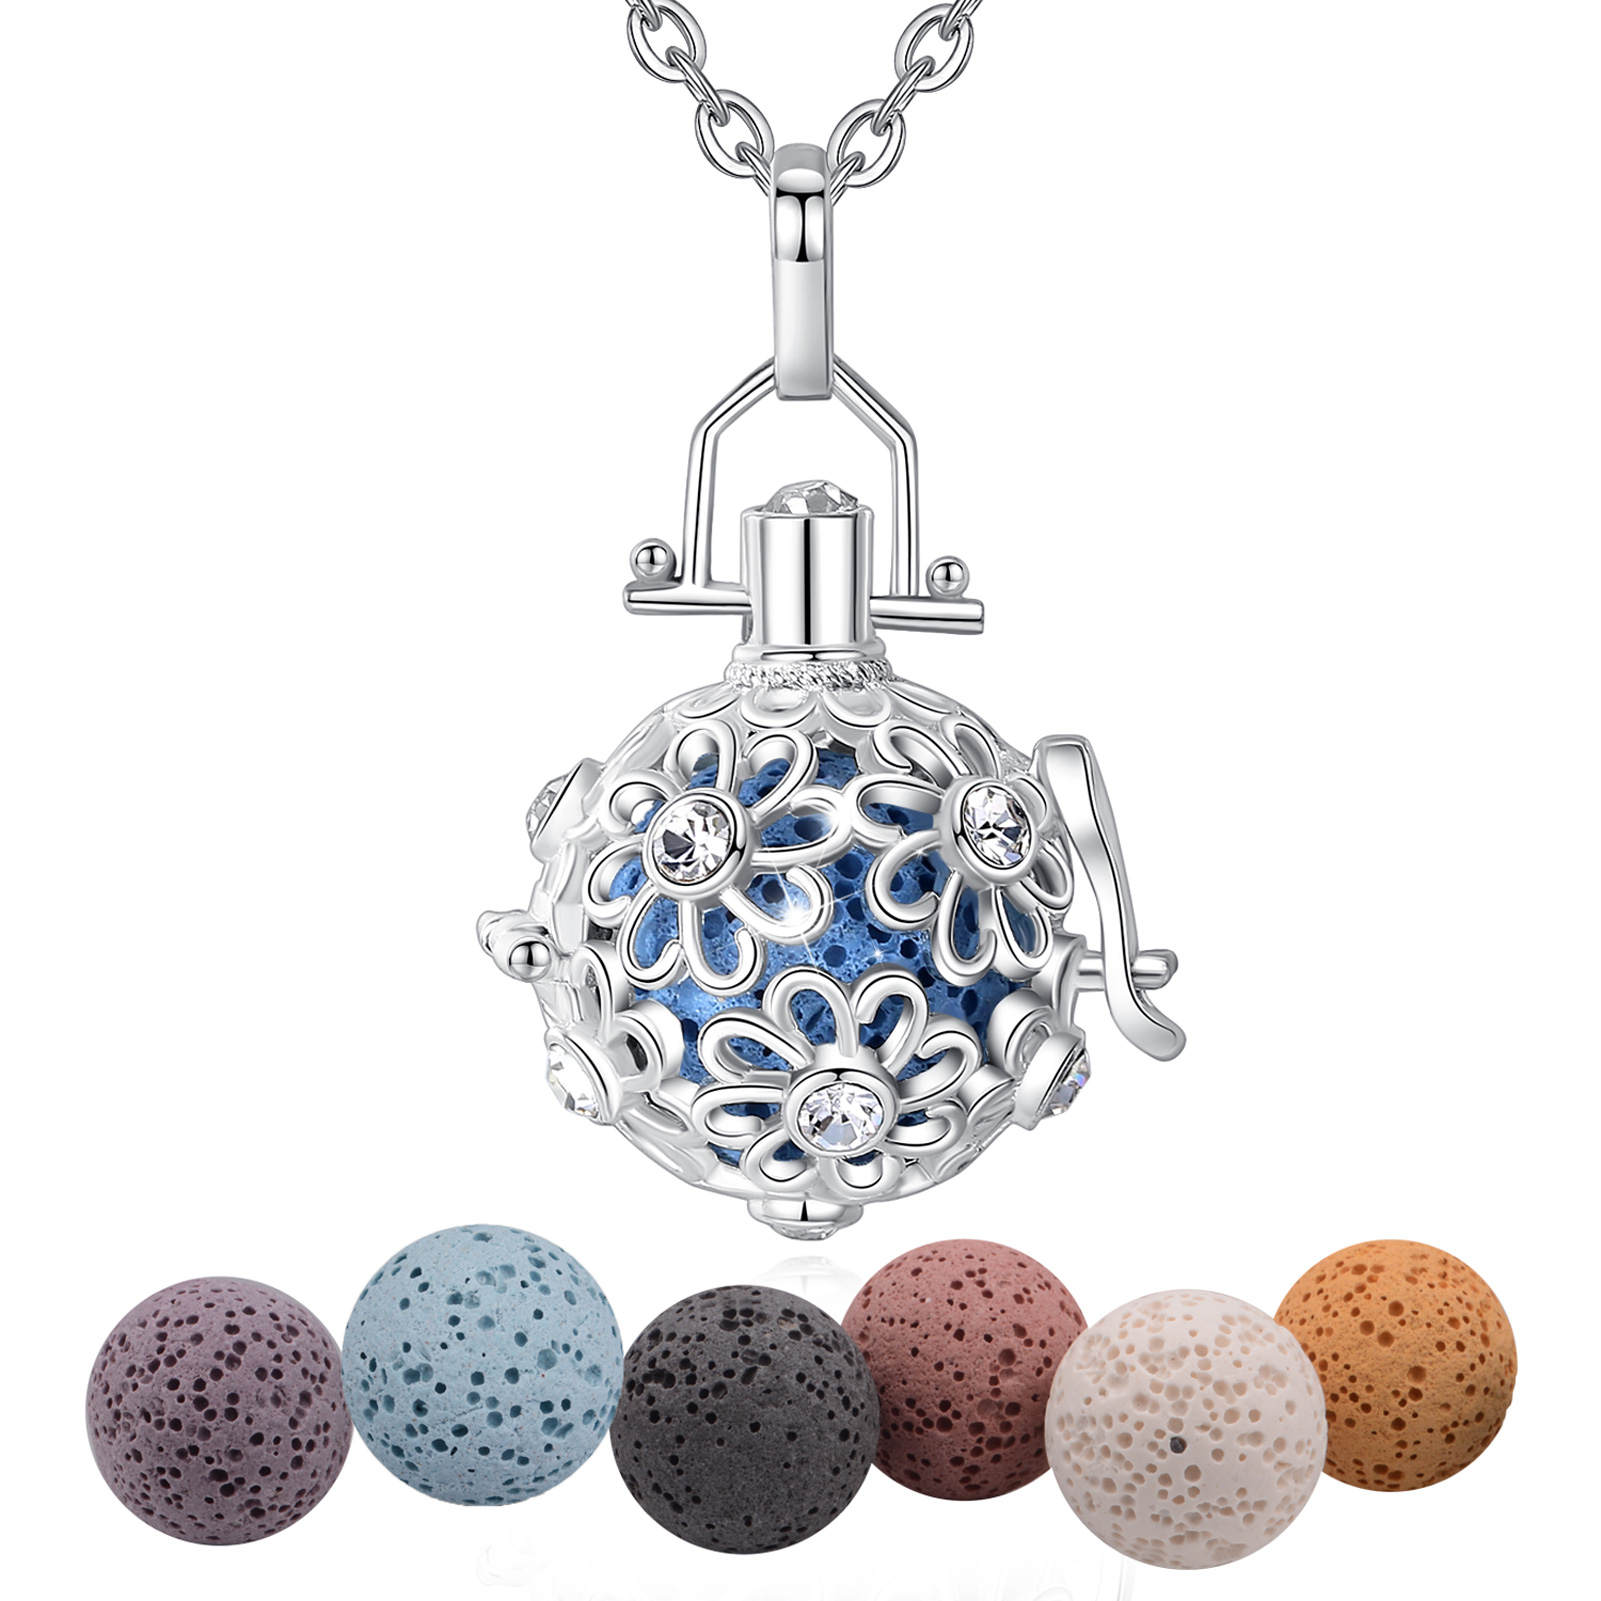 Merryshine Jewelry S925 Sterling Silver Aromatherapy Lava Stone Cage Essential Oil Diffuser Necklace for Girl